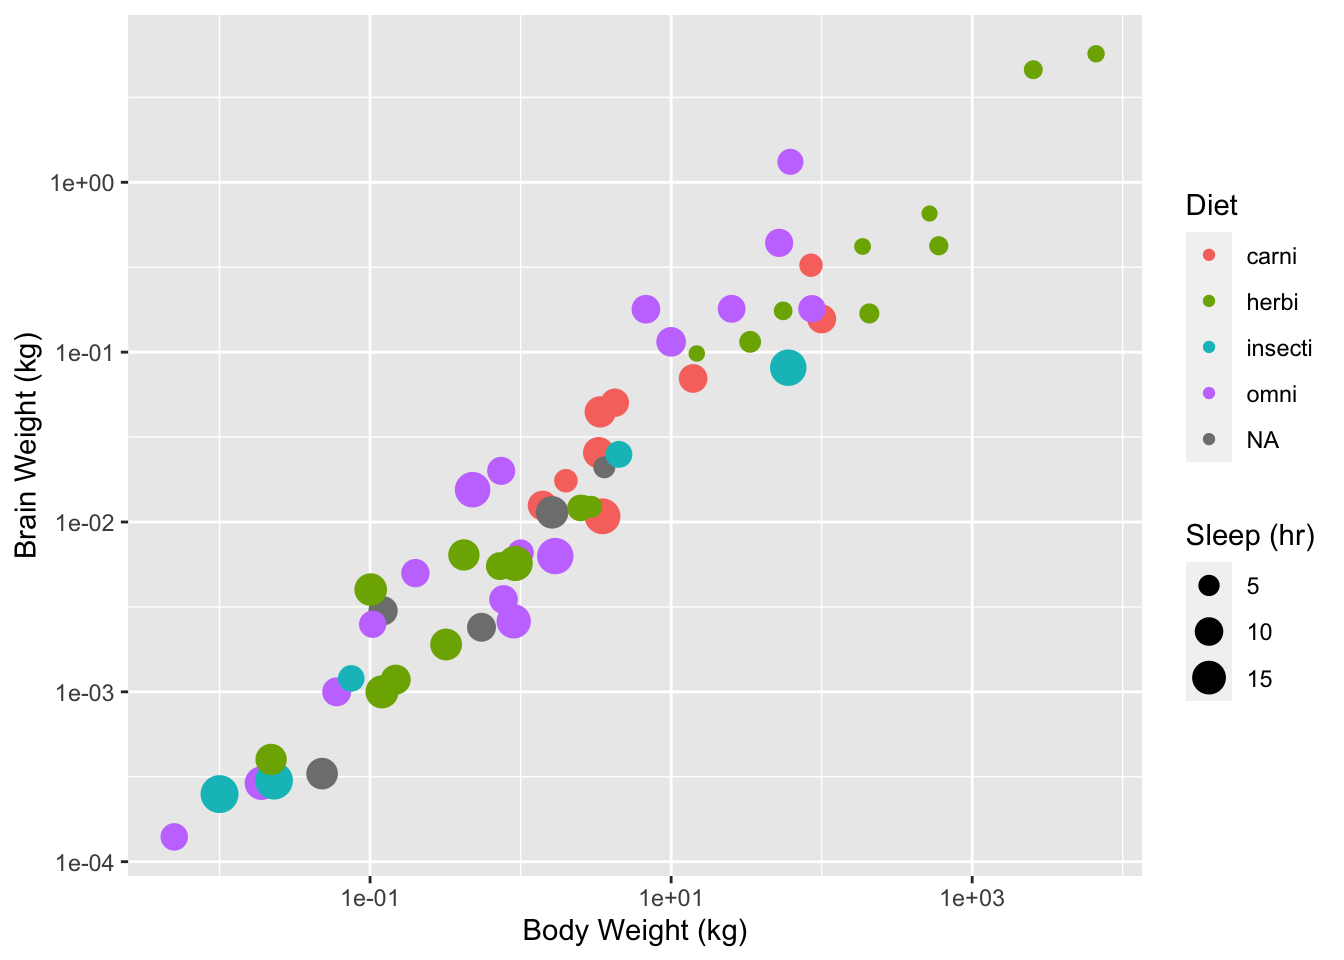 Body weight against brain weight for various mammal species